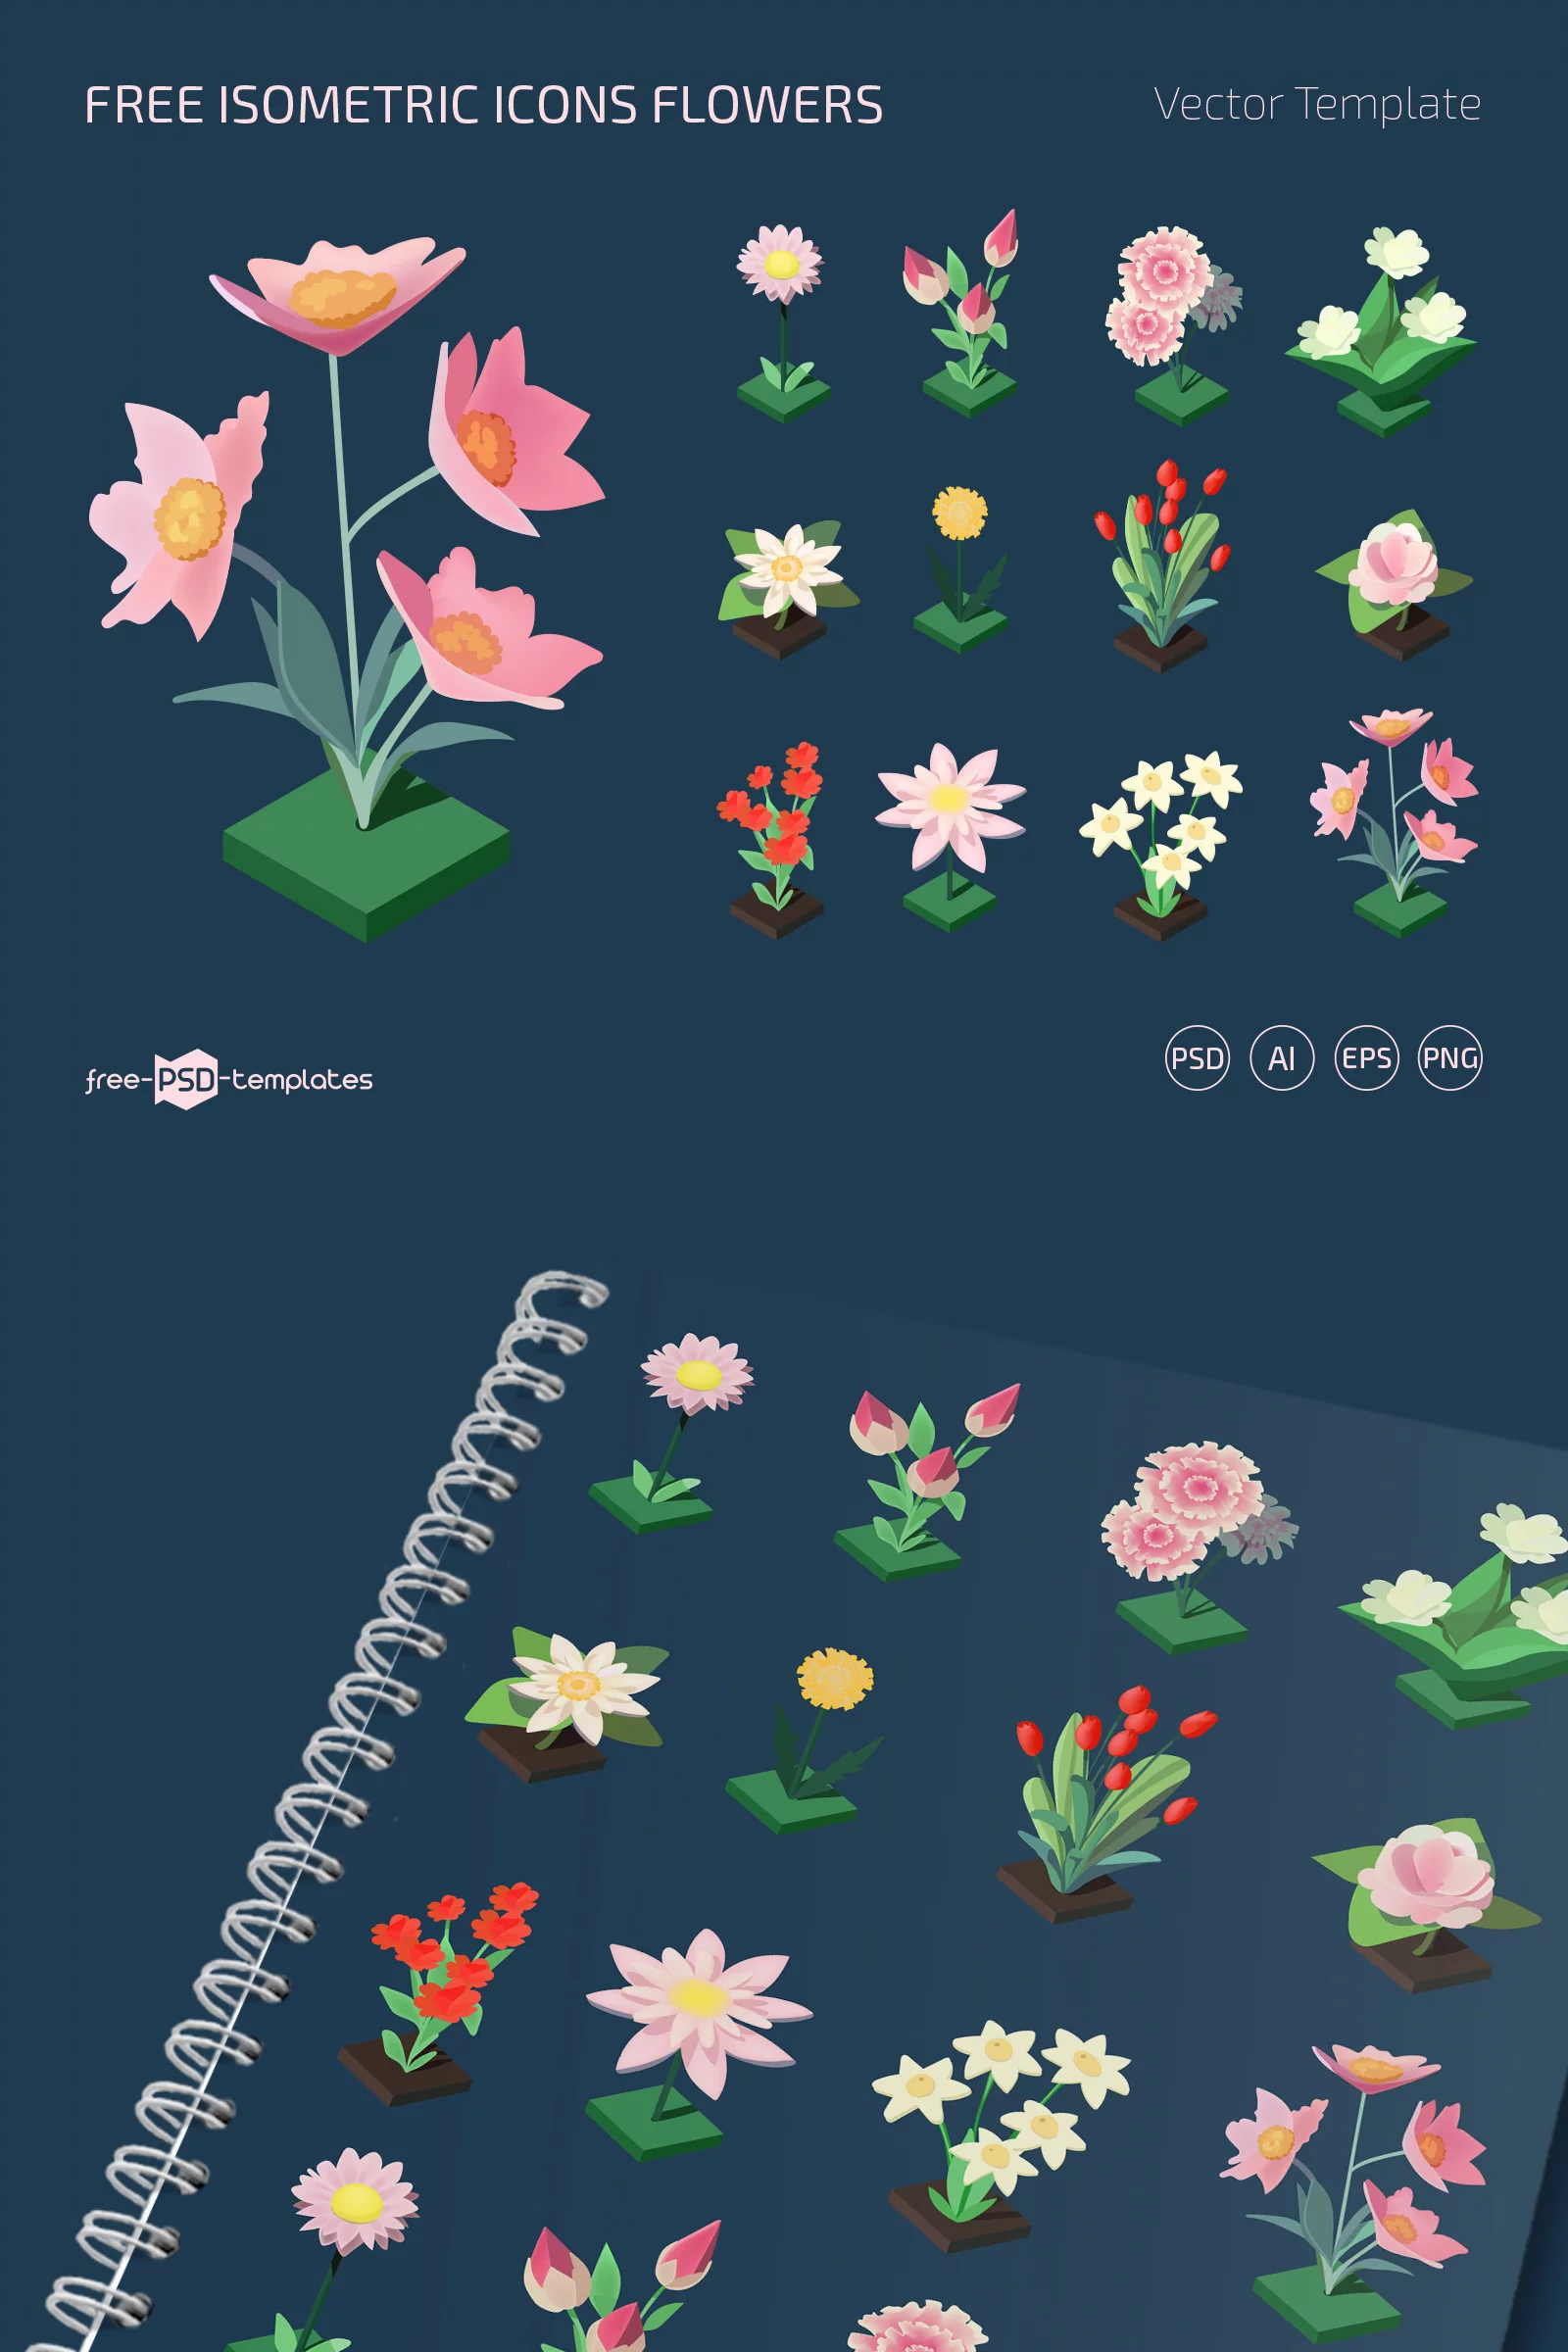 Free Isometric Flowers Icons (PSD, AI, EPS, PNG)